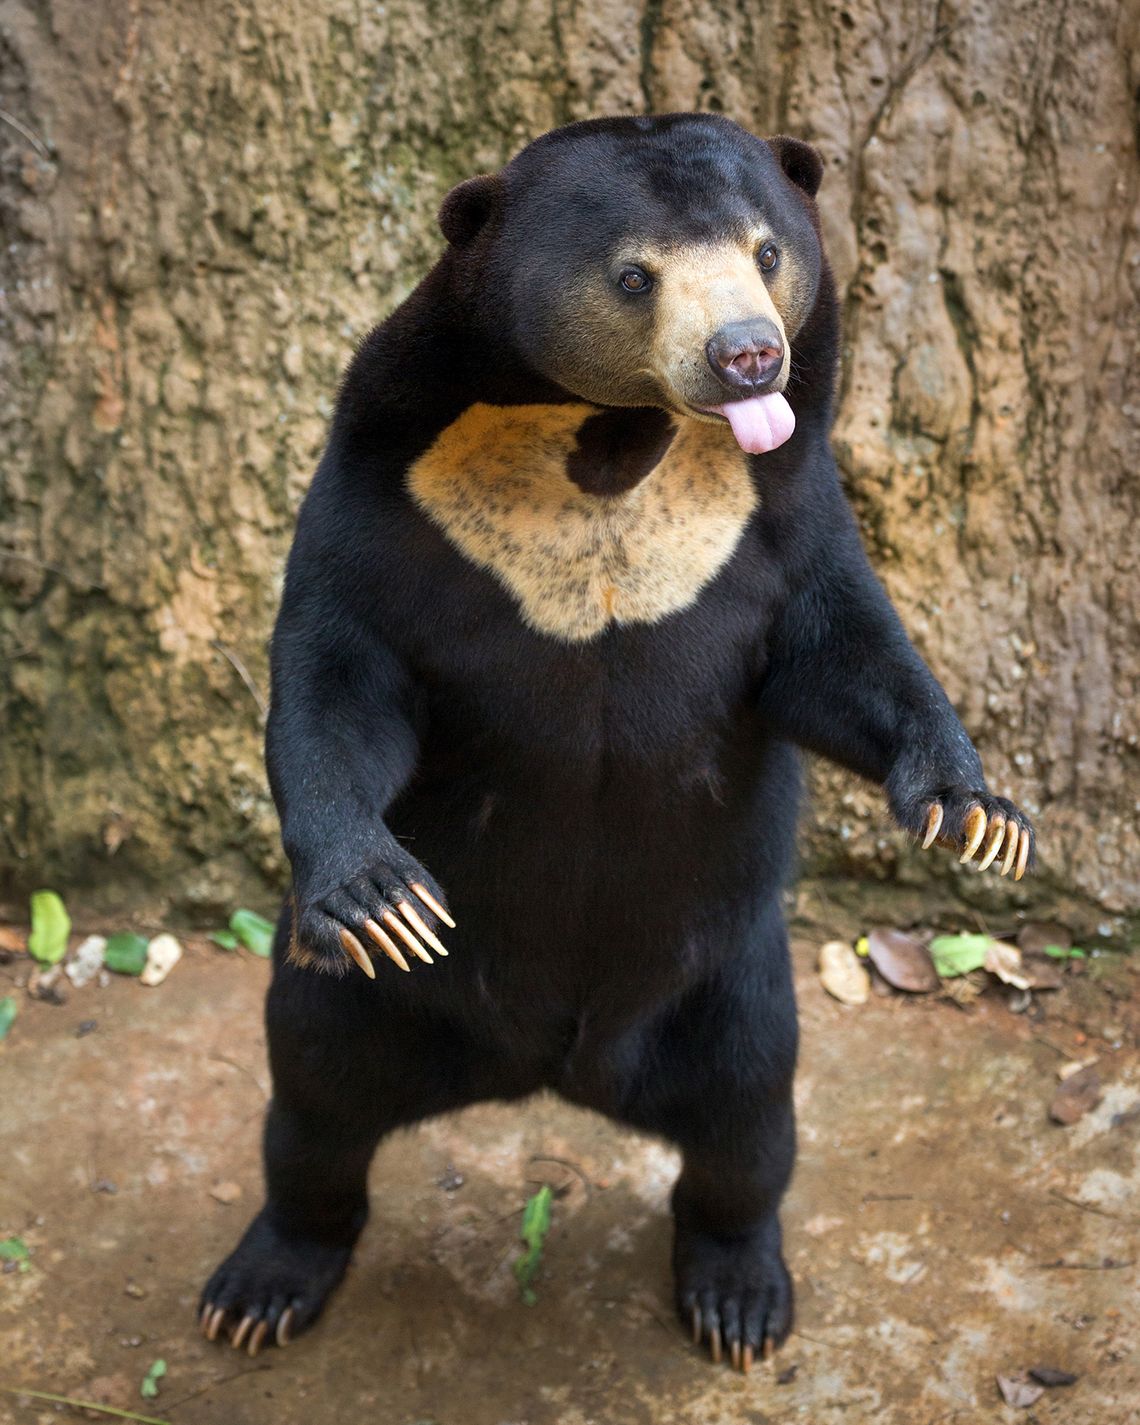 Leave Angela, The Sun Bear Accused Of Being A Human, Alone